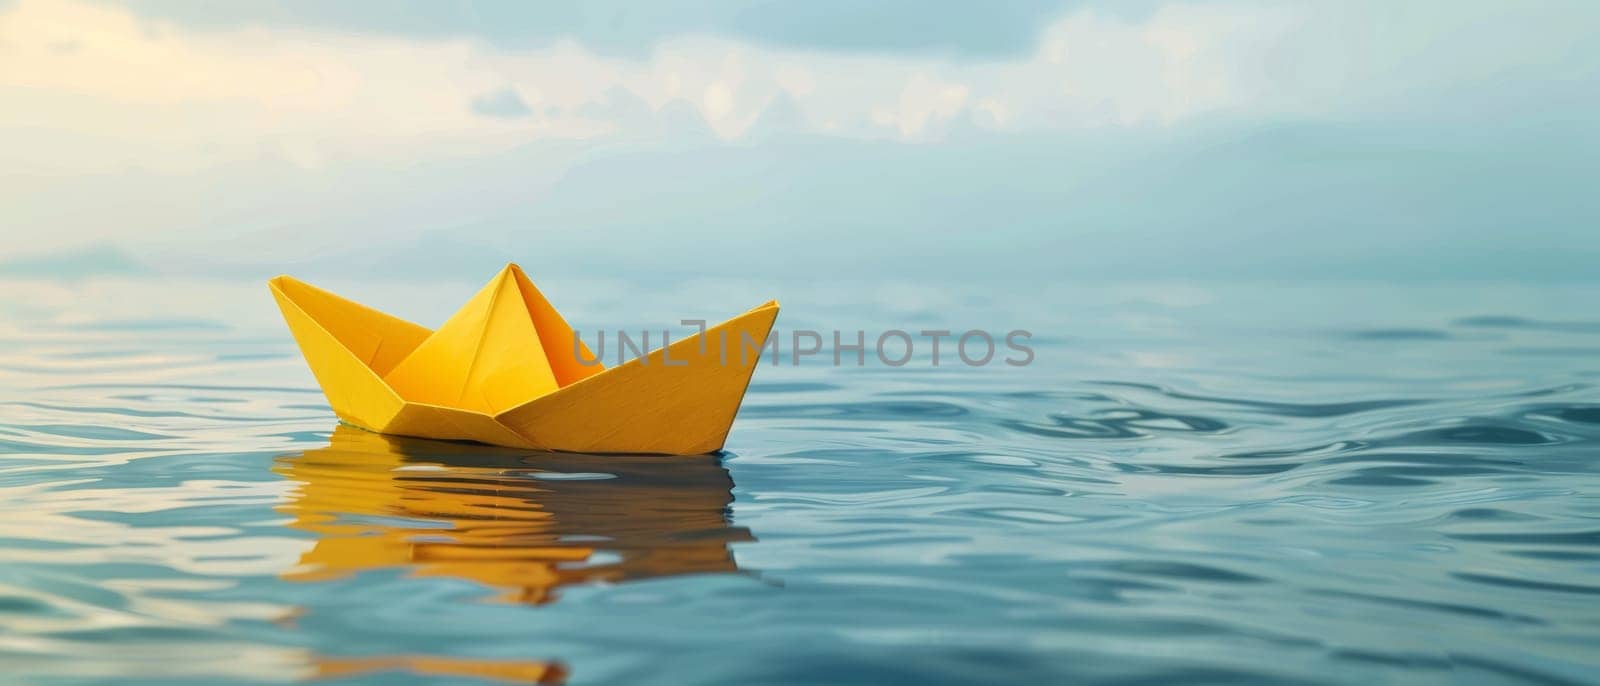 A vibrant yellow origami boat floats peacefully on a calm blue water surface, reflecting its bright color